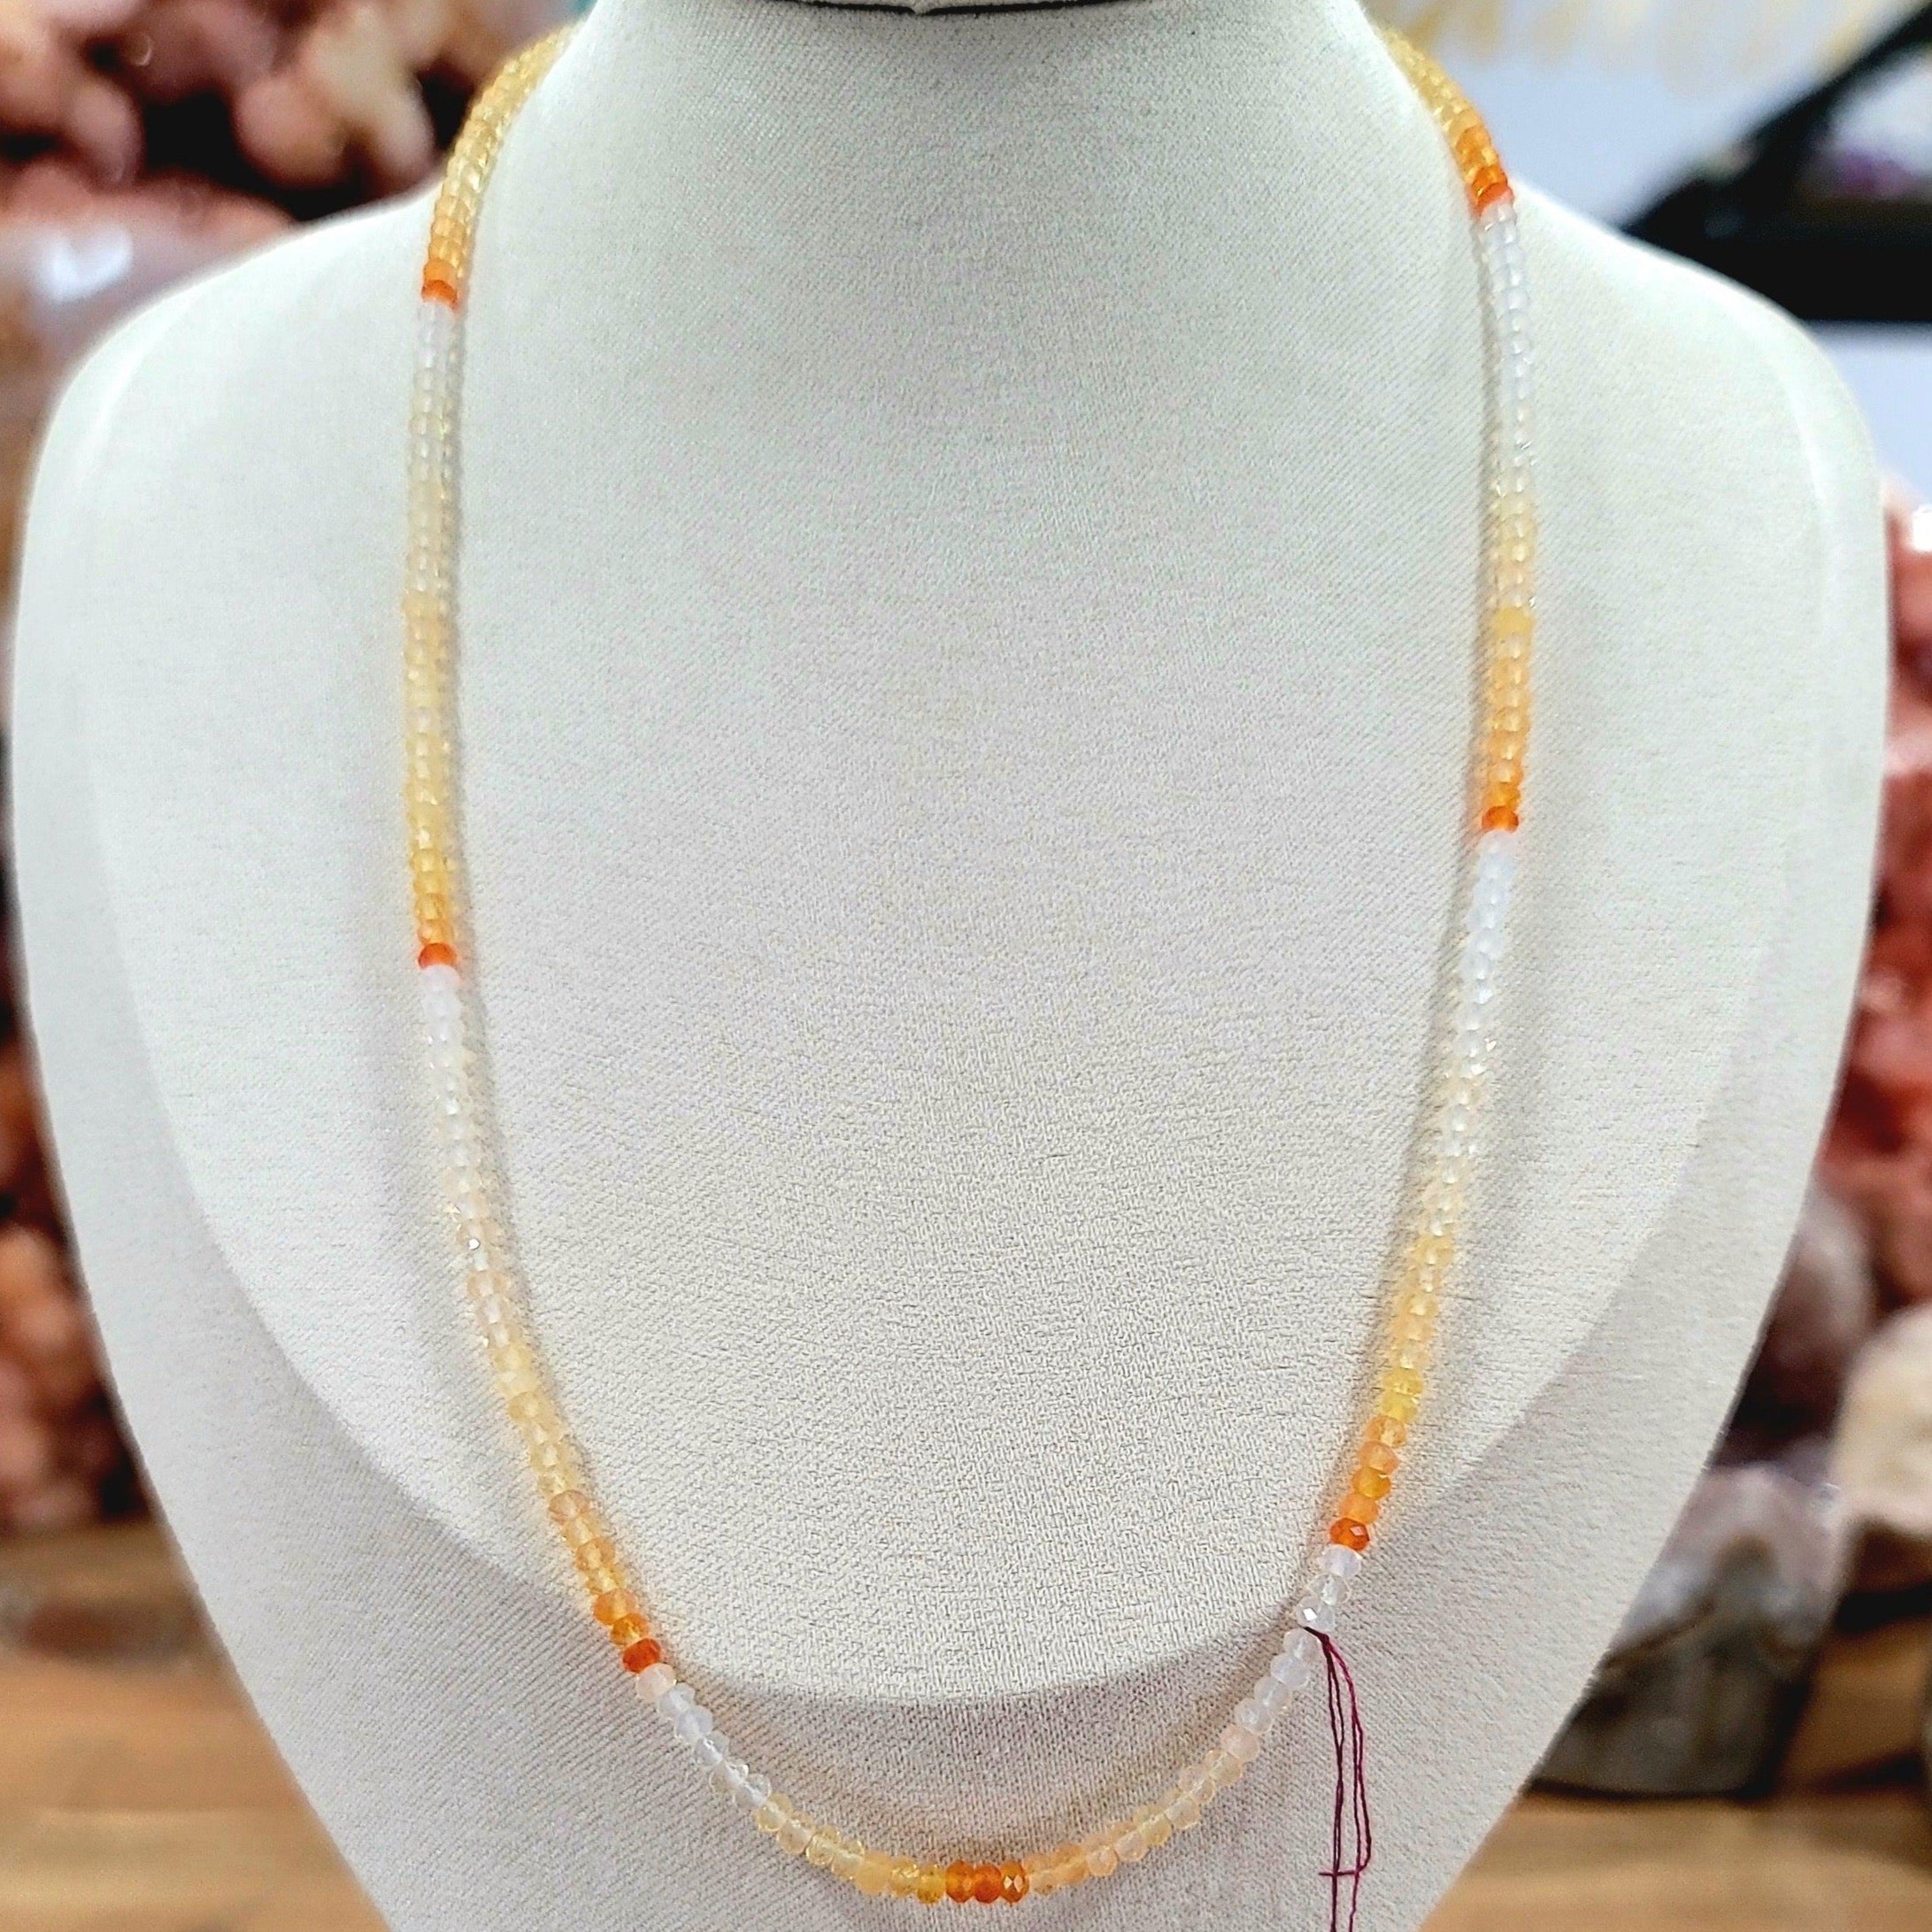 Fire Opal Waterfall Micro Faceted Necklace